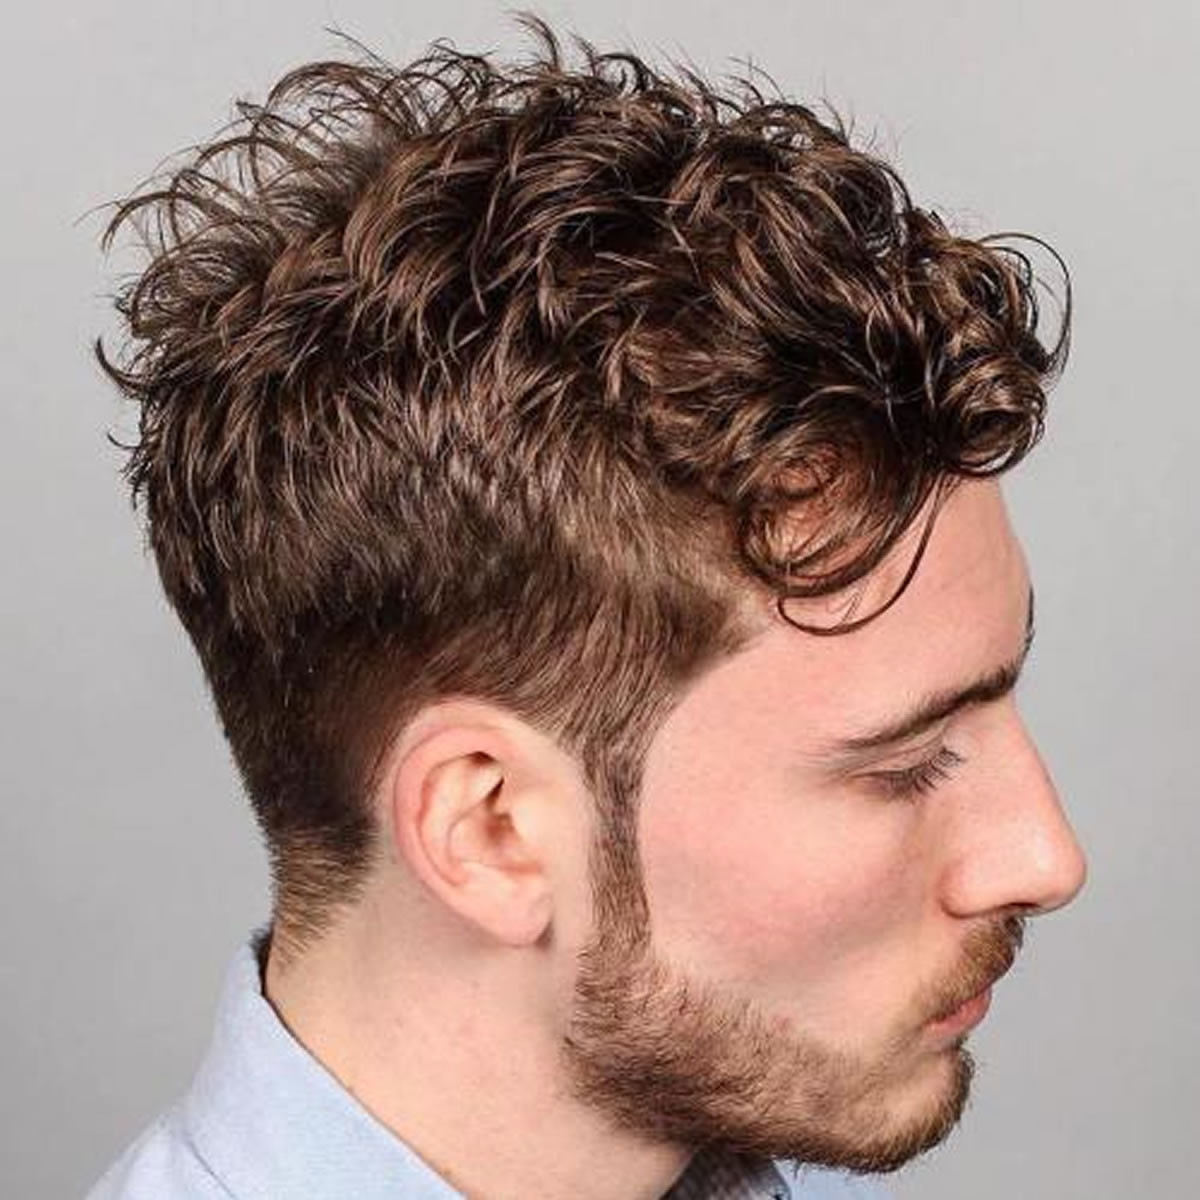 Hairstyles For Boys With Curly Hair
 2018 Short Haircuts for Men – 17 Great Short Hair Ideas